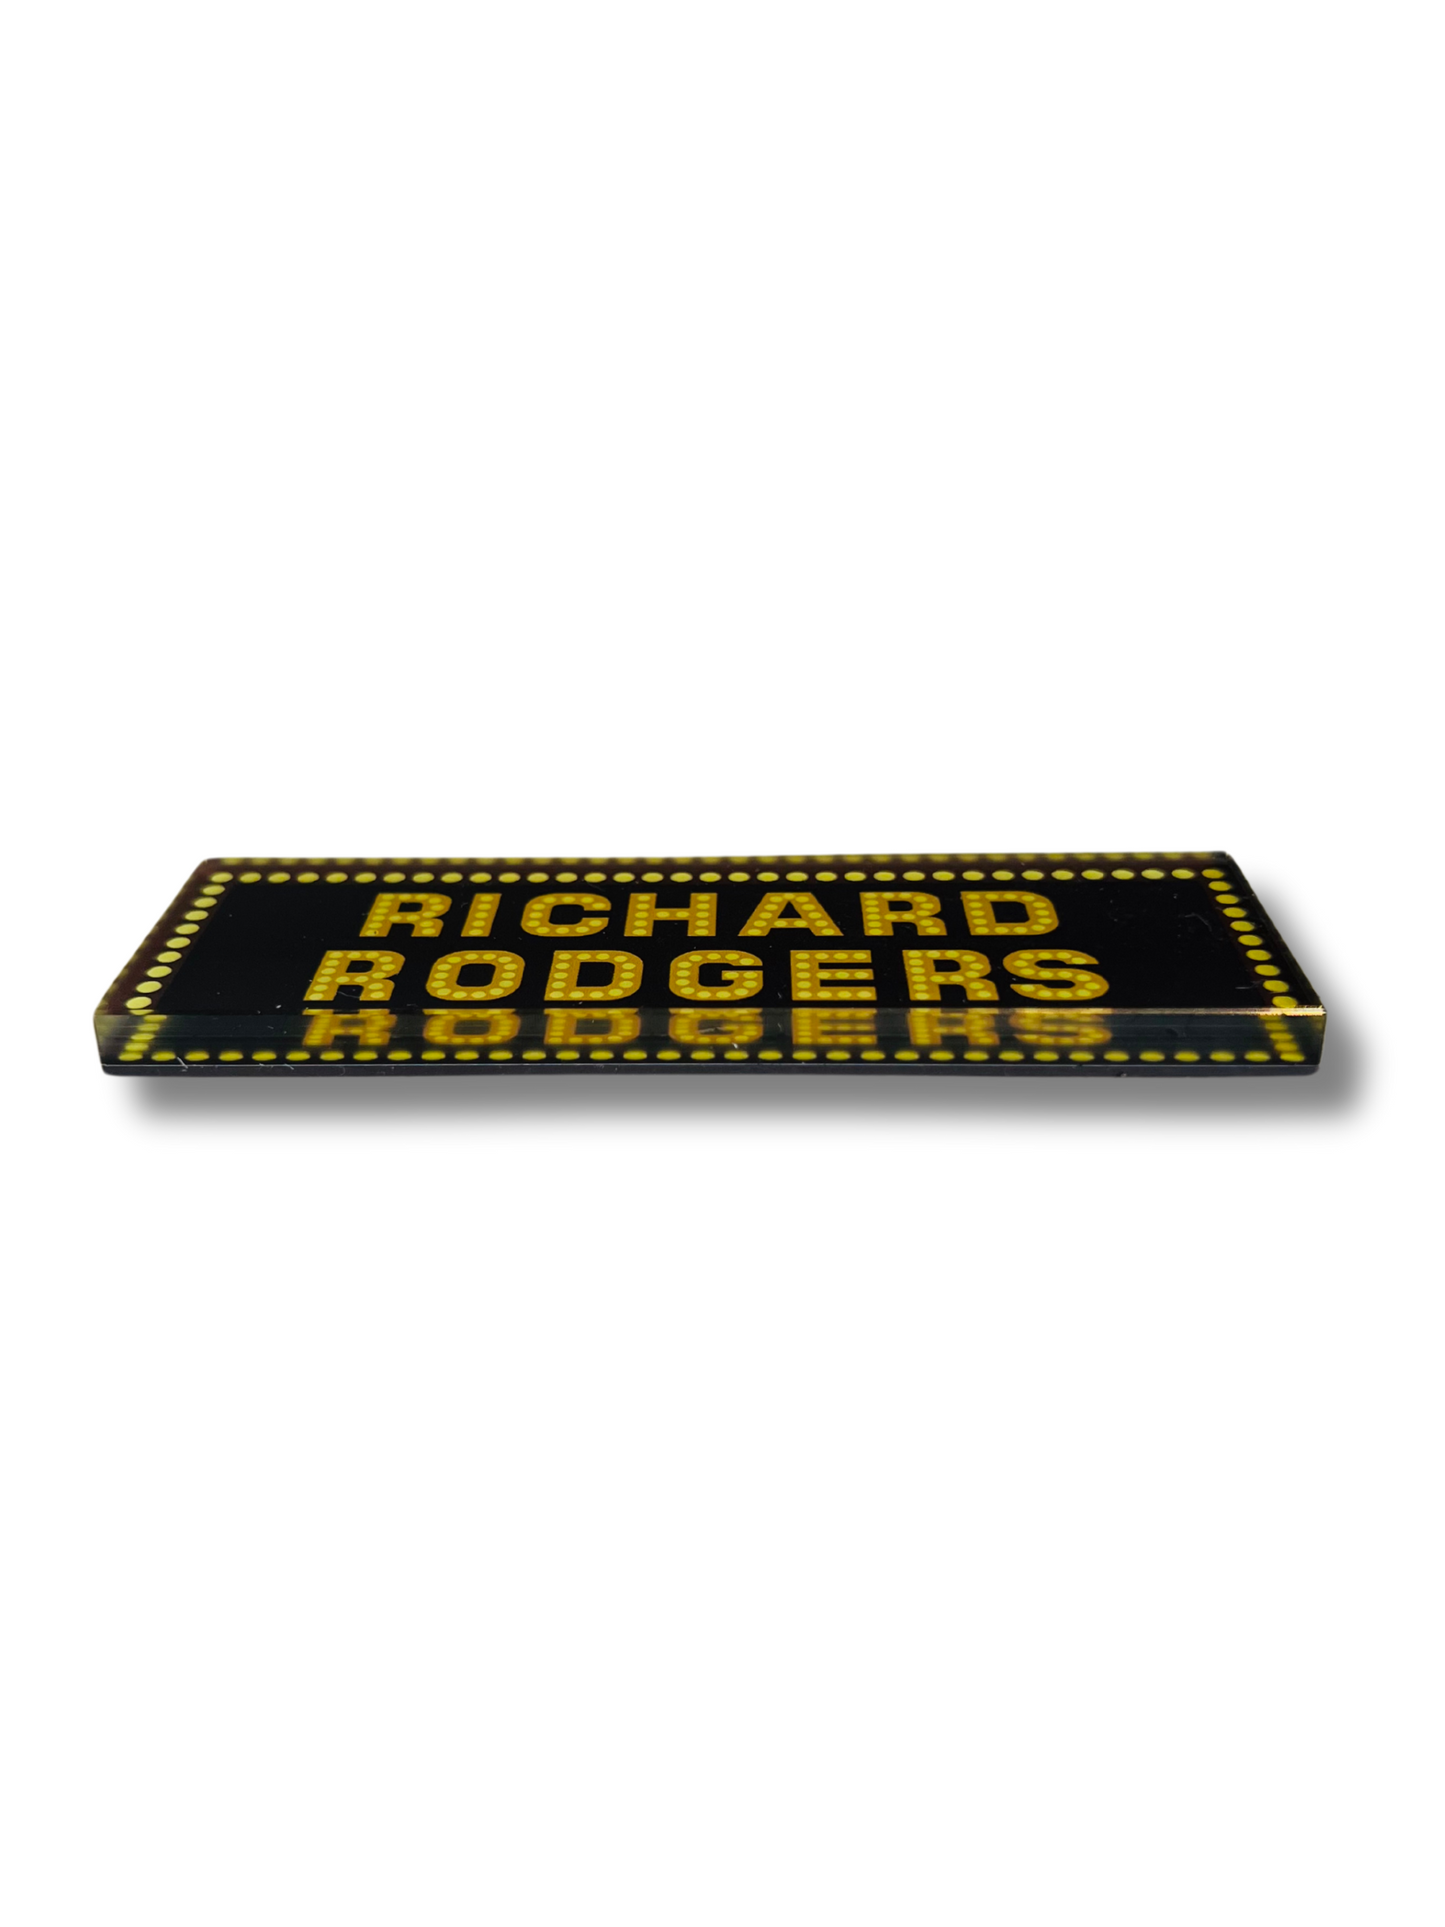 Richard Rodgers Marquee Acrylic Magnet